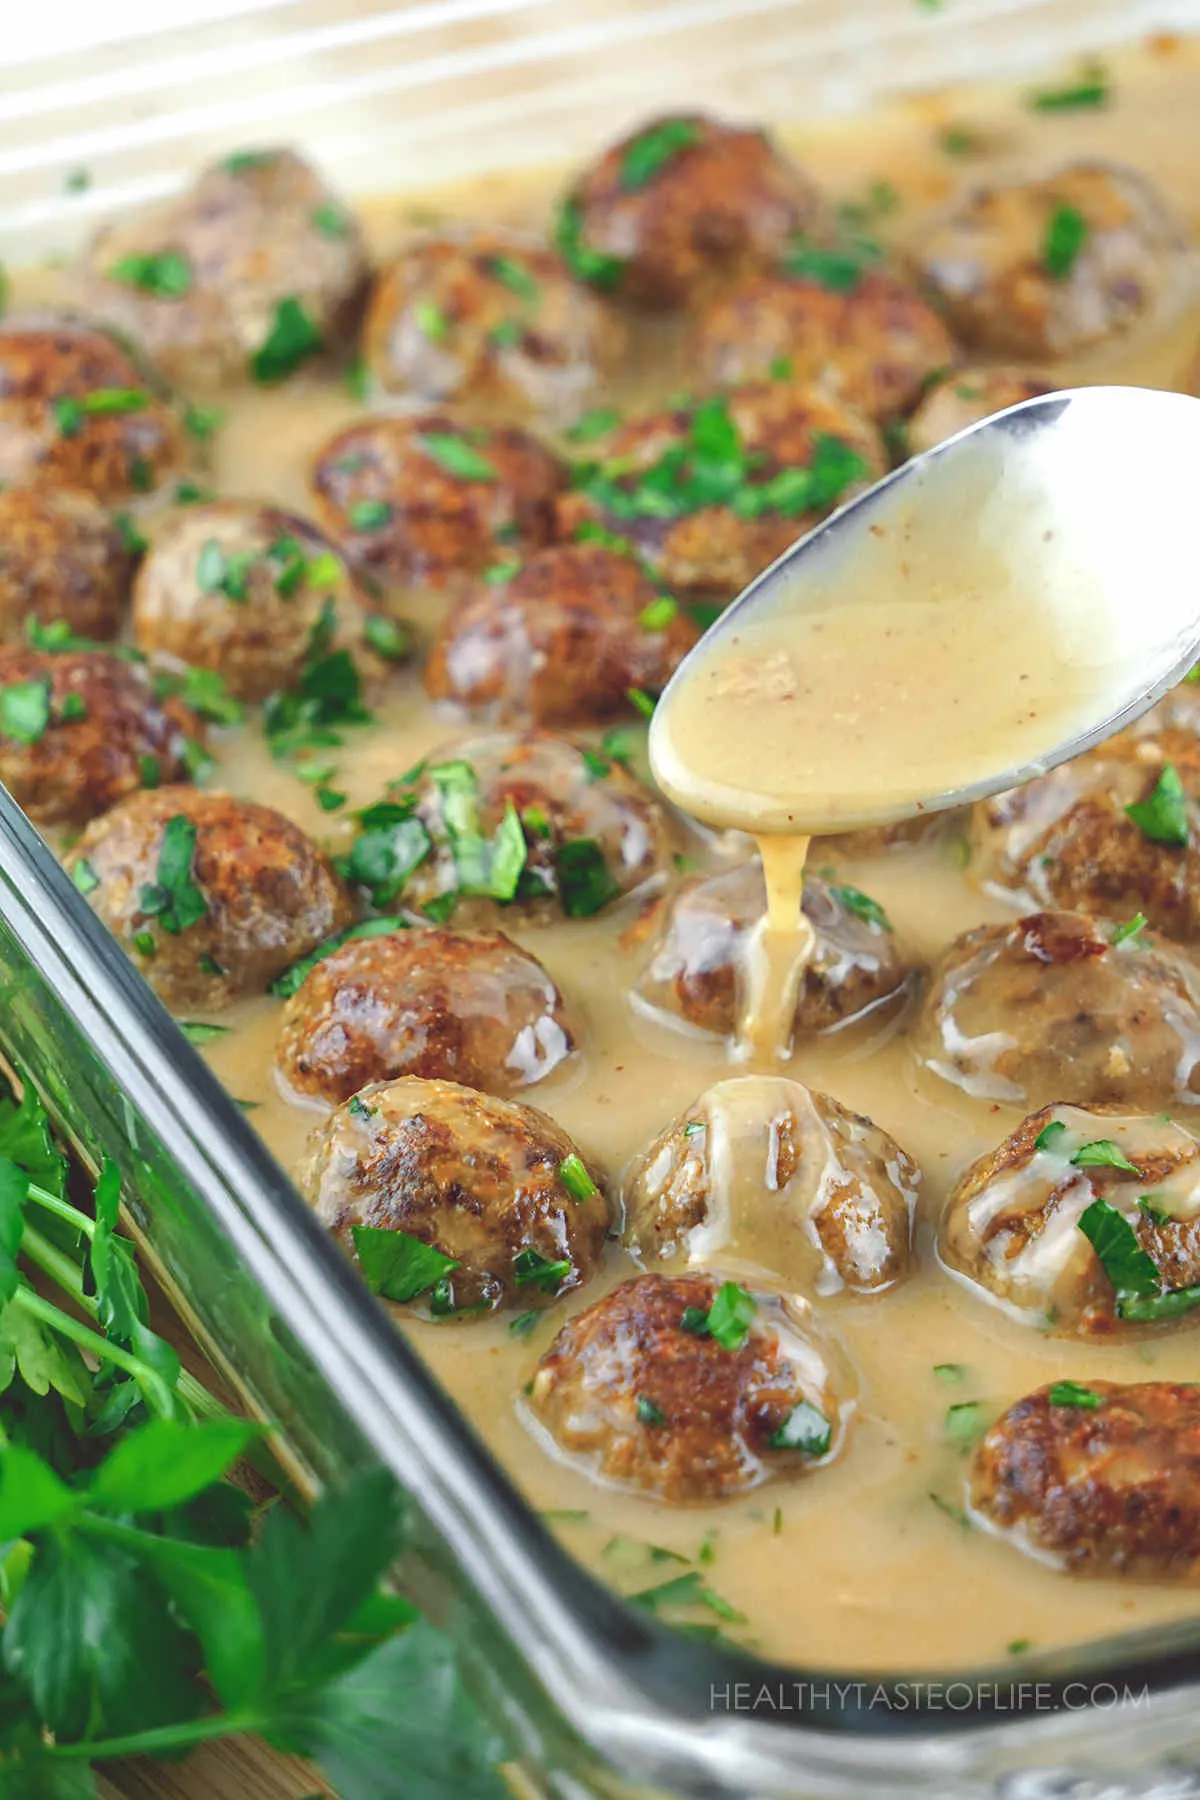 Gluten free Swedish meatballs with ground beef and ground turkey cooked with dairy free gravy in a baking dish and garnished with chopped parsley.